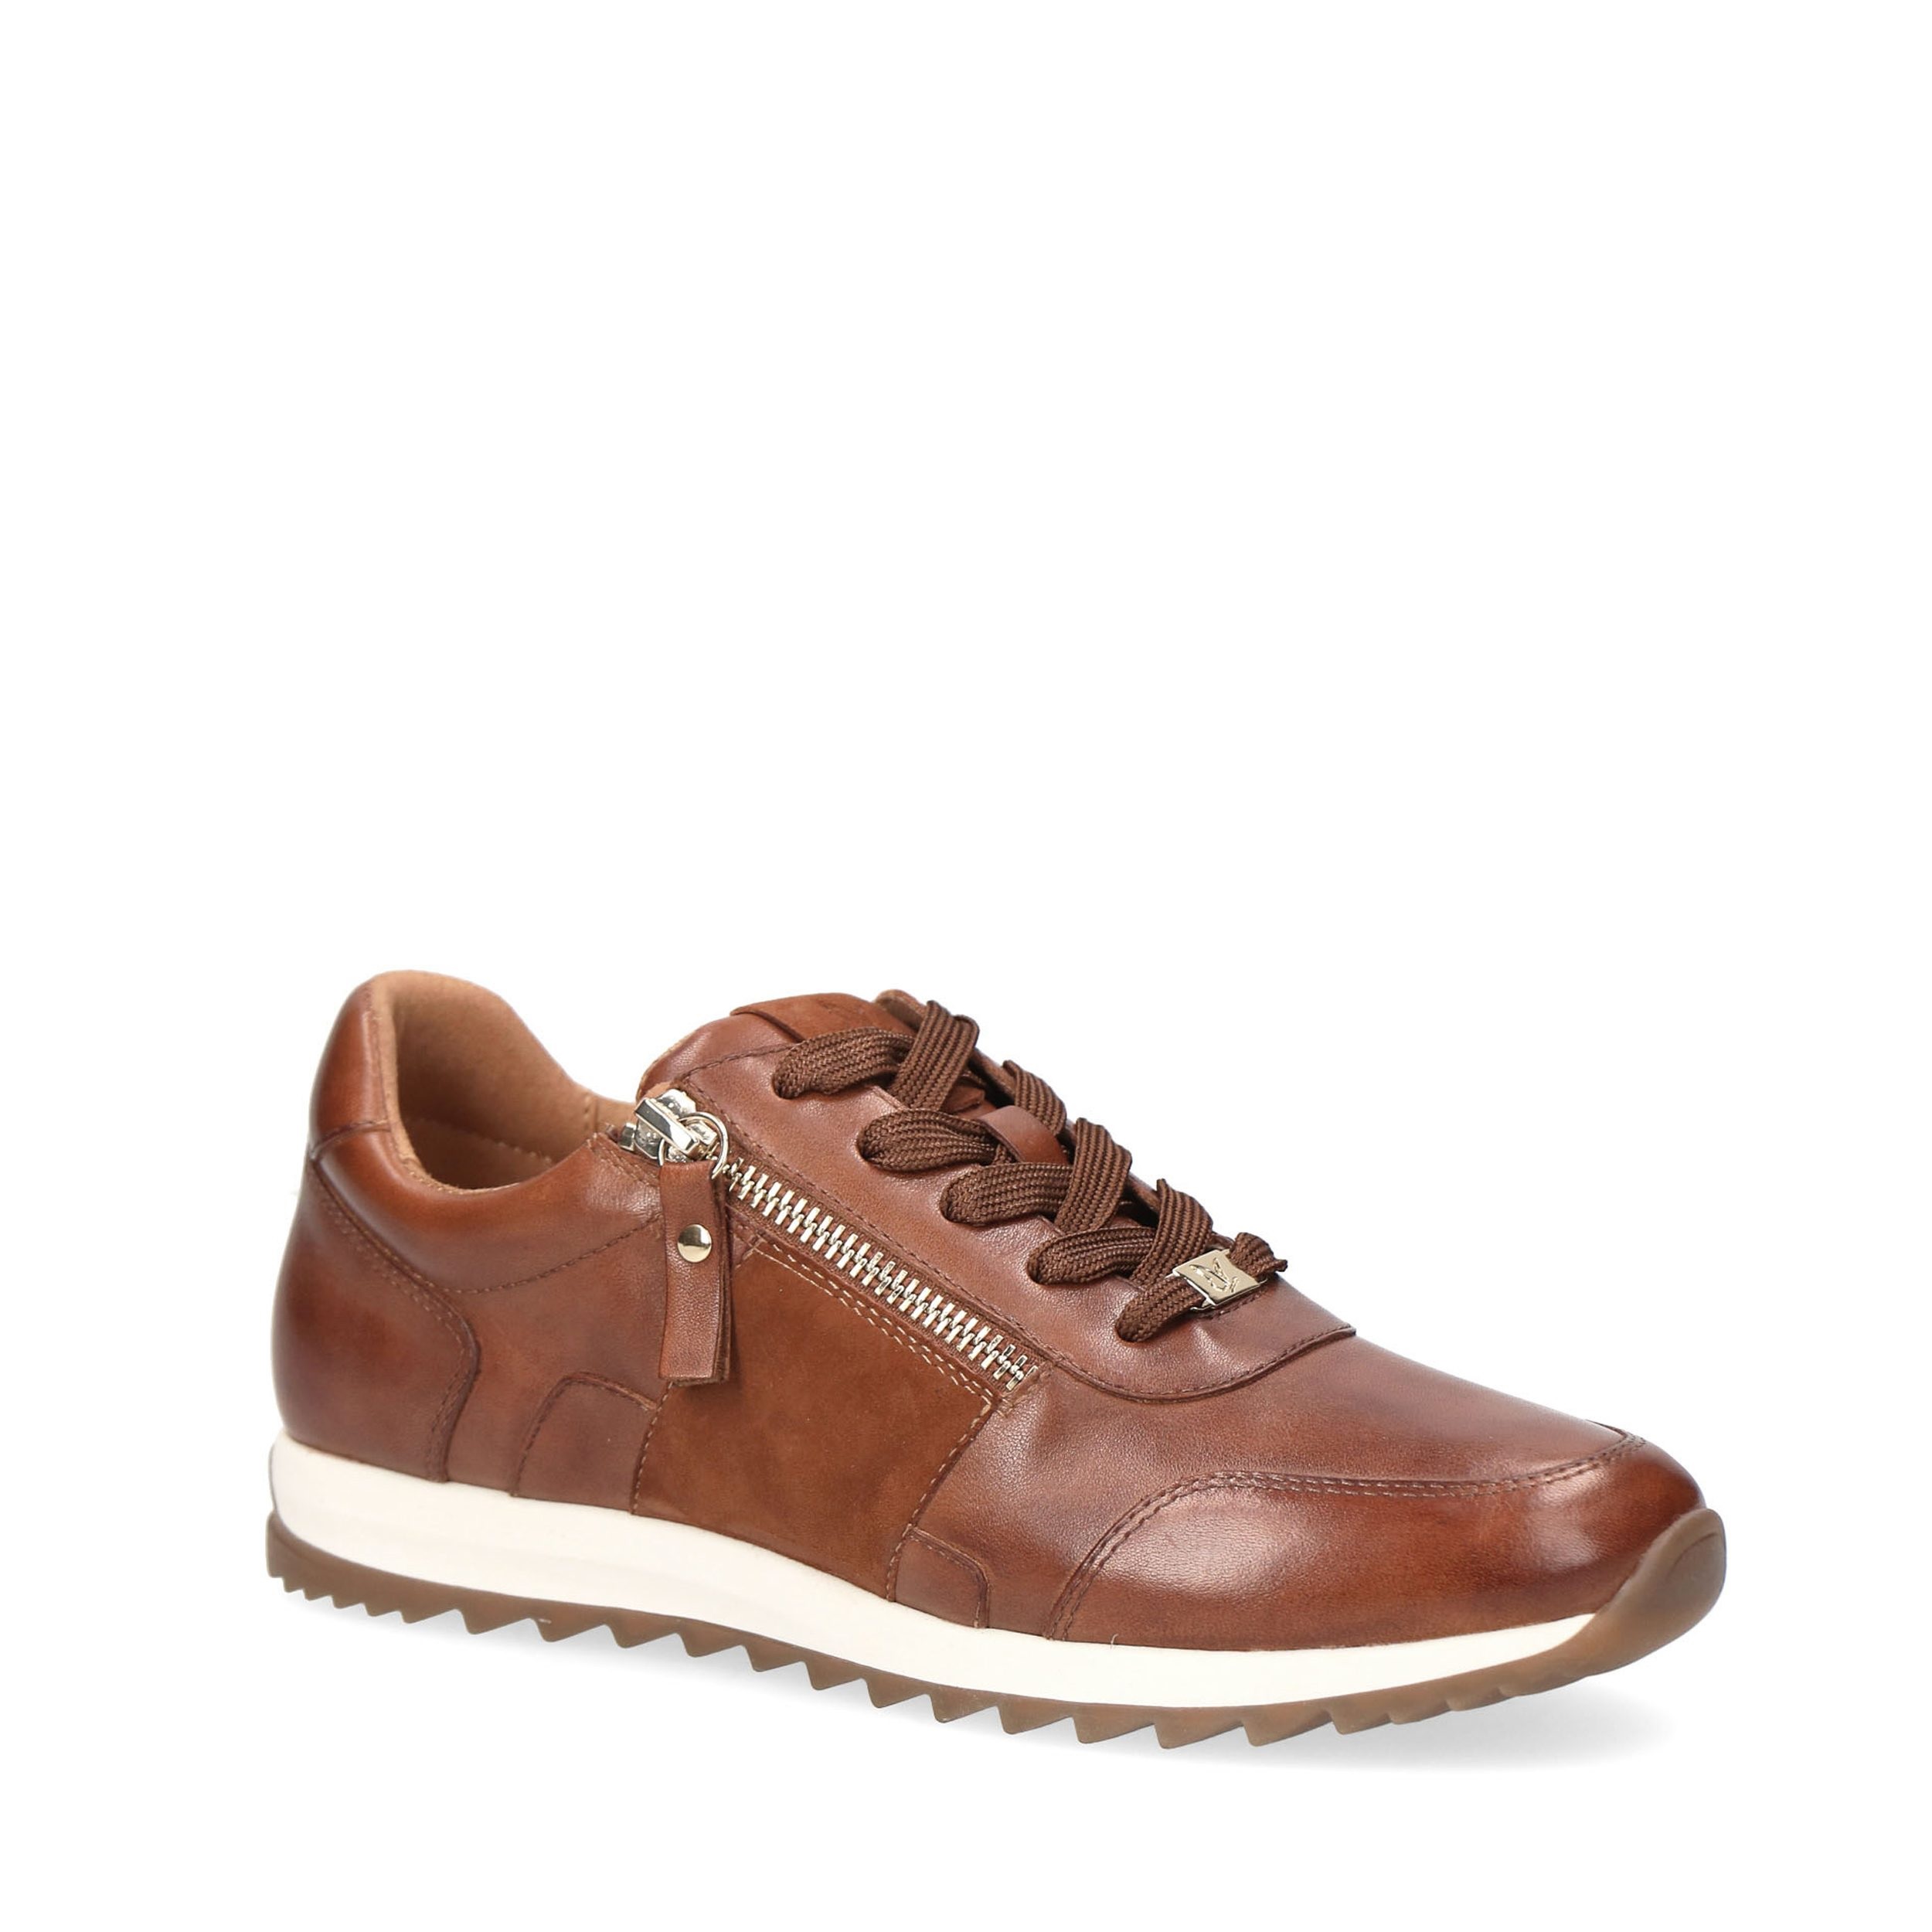 Caprice Ladies Lace-Up Wide Fitting Side Zip Cognac Sneaker/Trainer ...